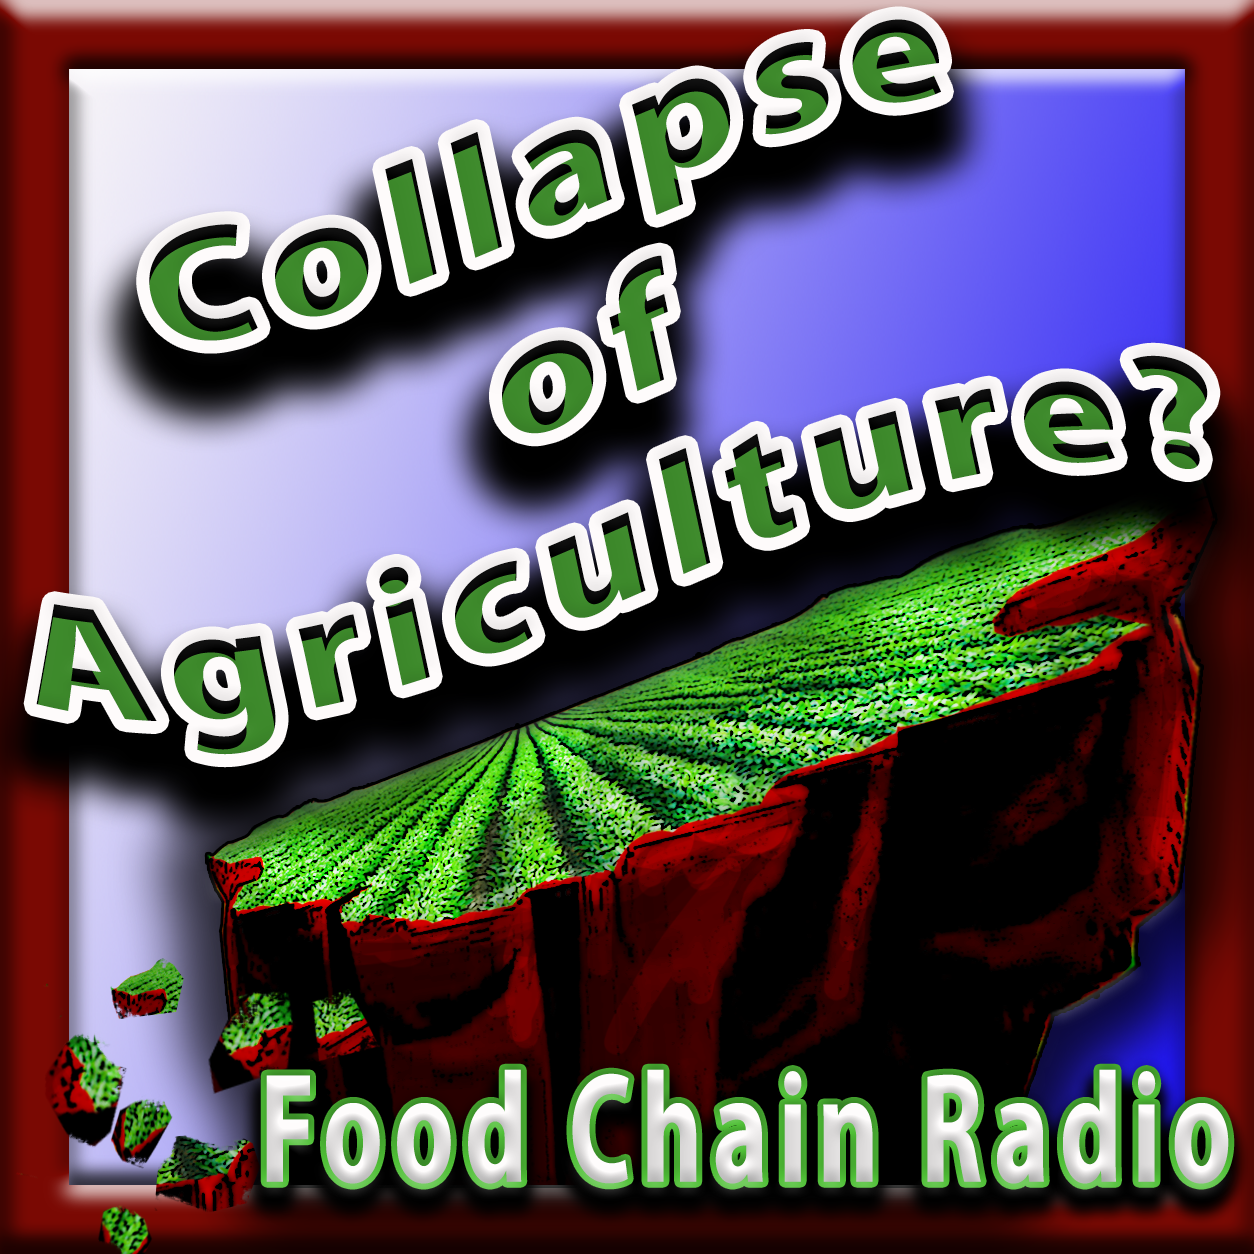 Michael Olson Food Chain Radio – The Collapse of Agriculture?